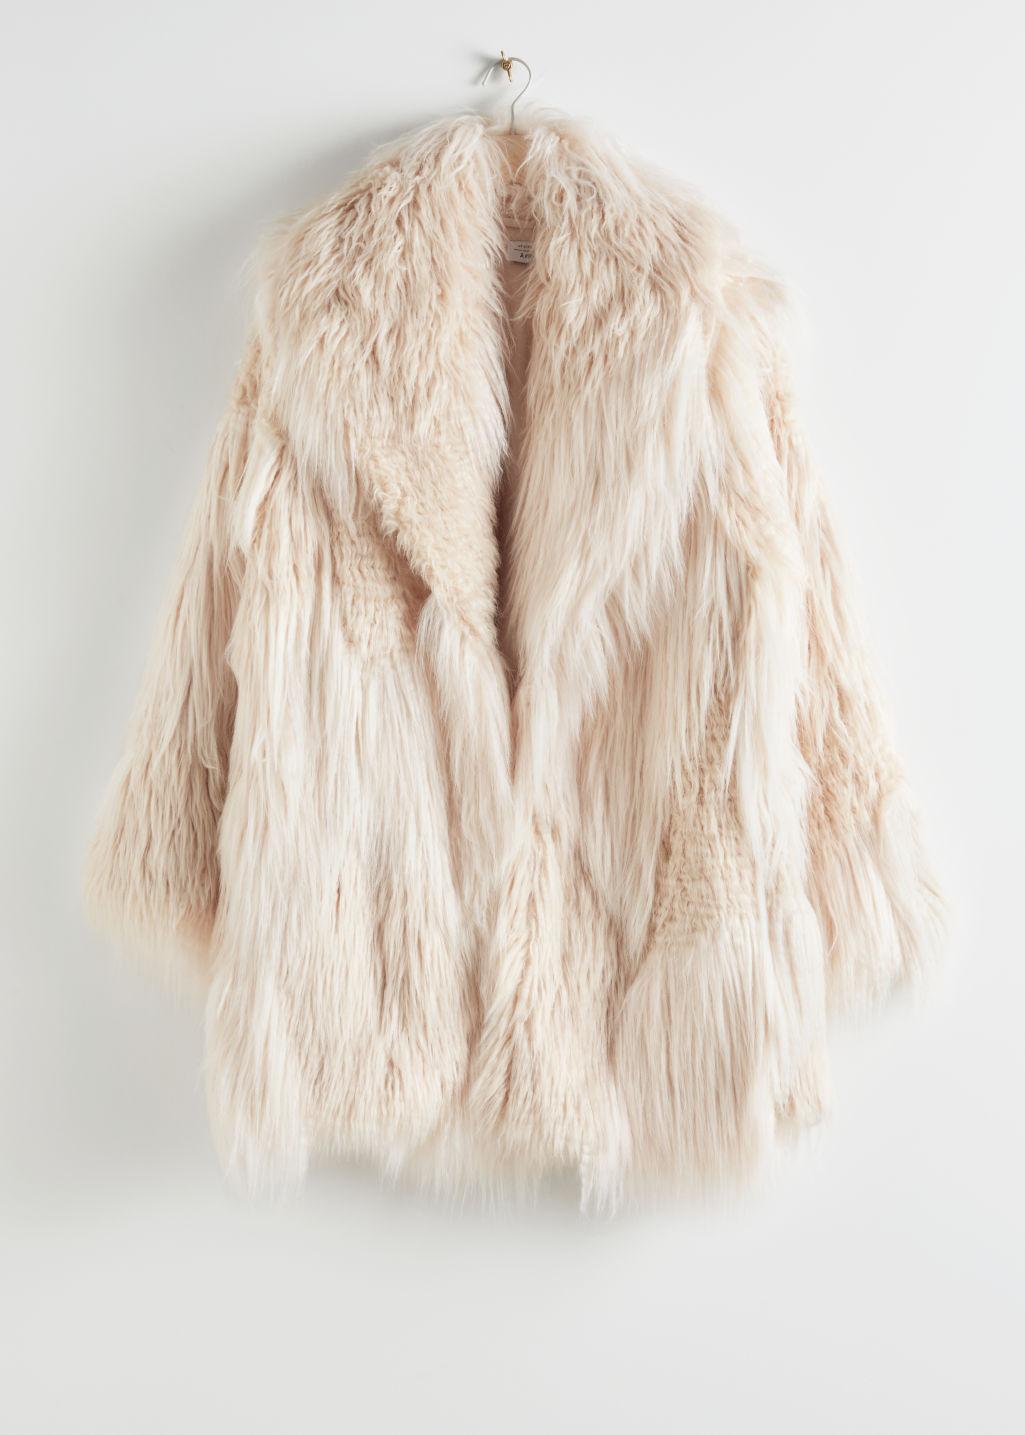 & Other Stories Oversized Shaggy Faux Fur Coat in White | Lyst Canada